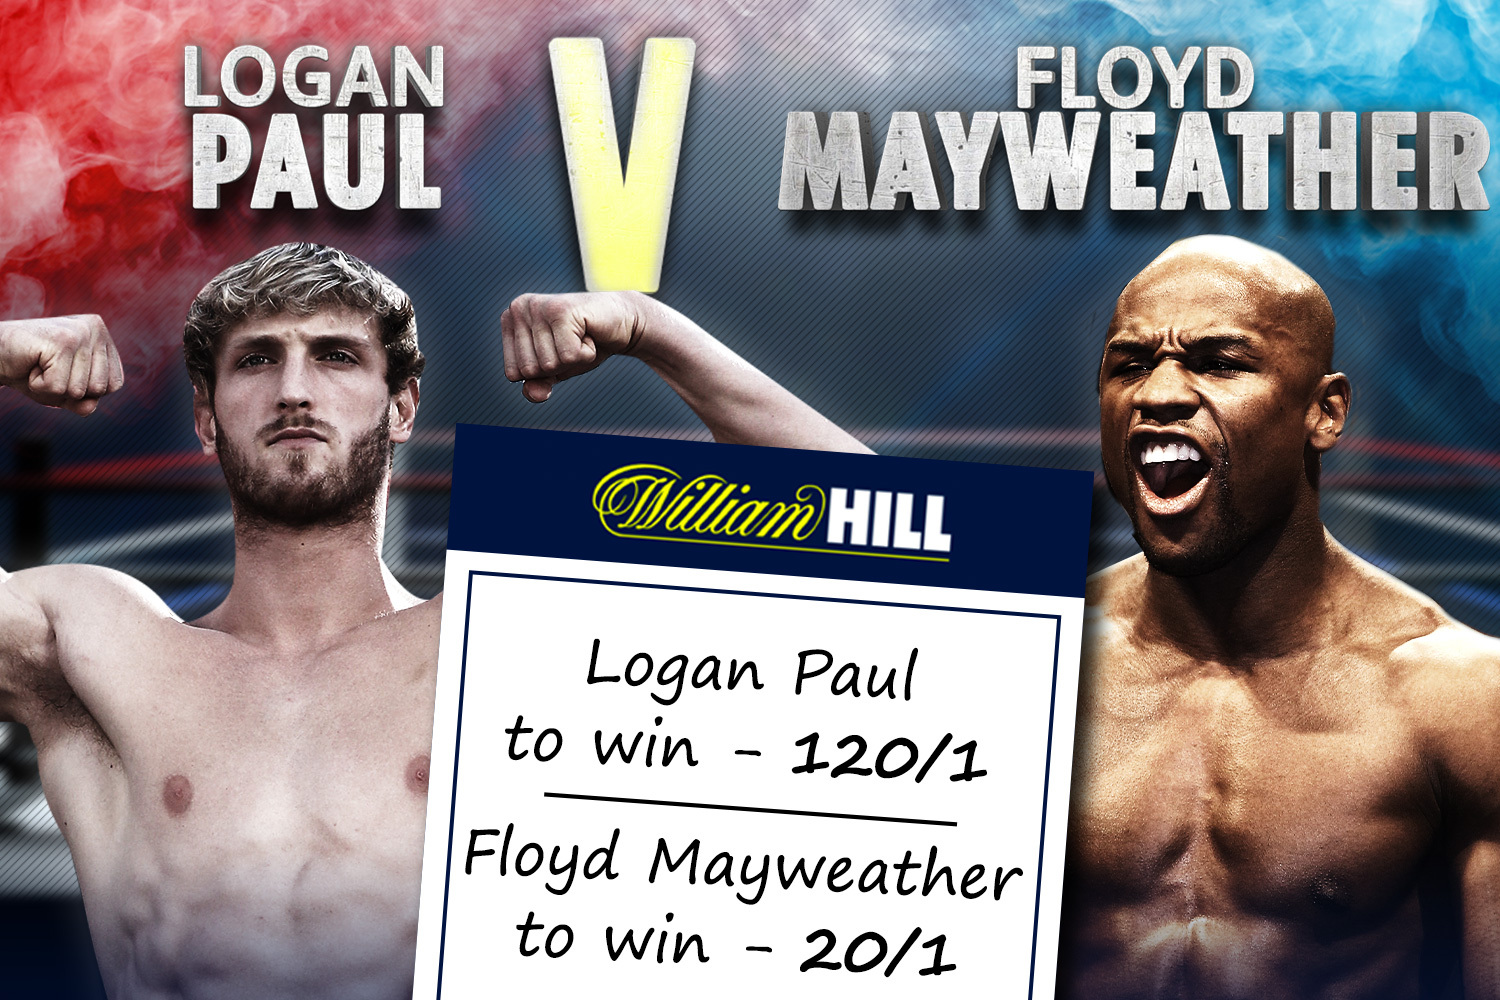 Floyd Mayweather and Logan Paul step into the ring this weekend